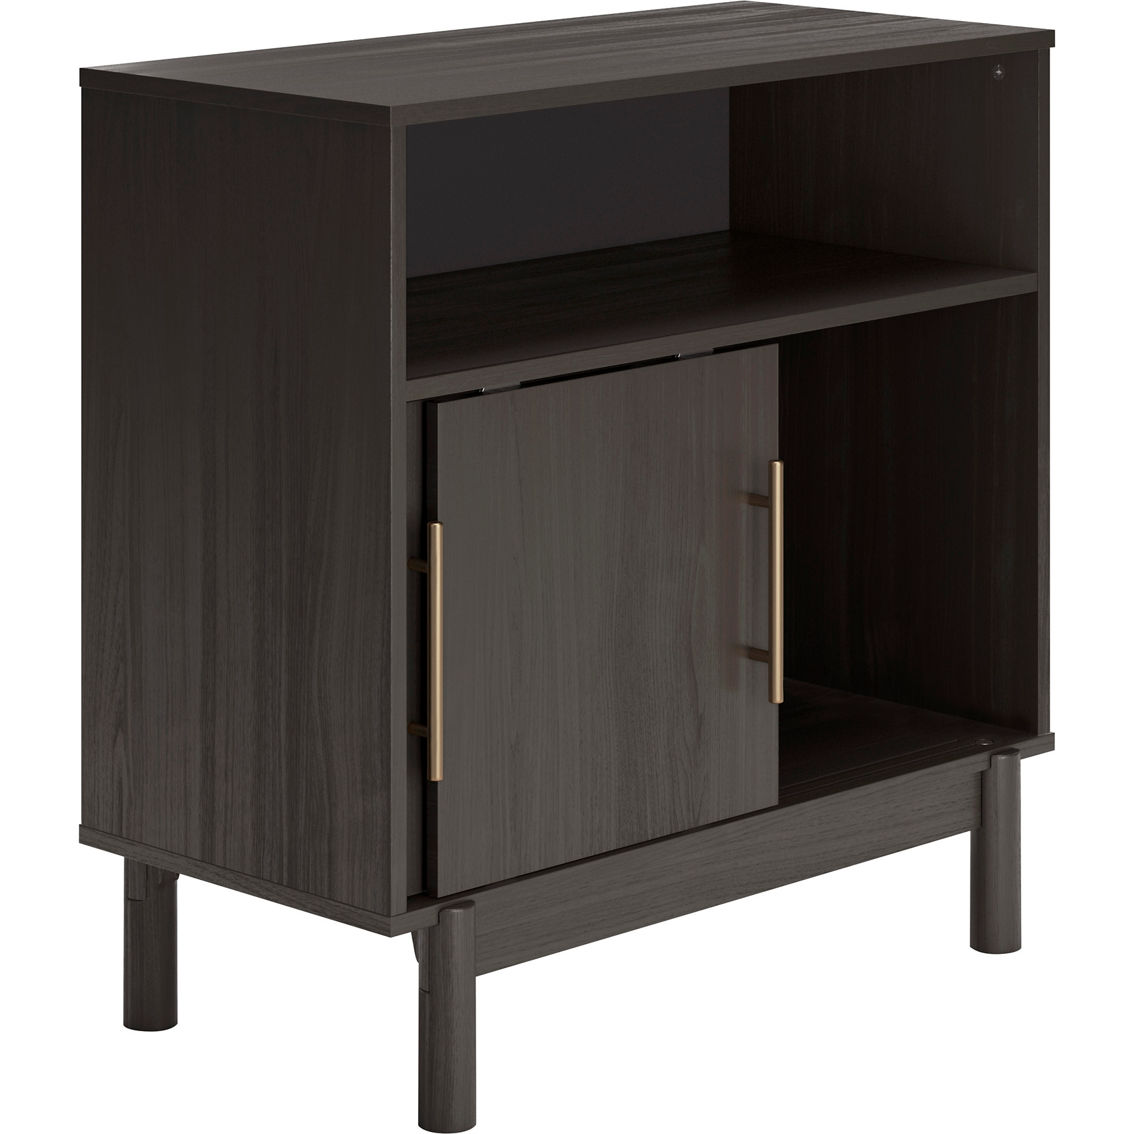 Signature Design by Ashley Brymont Accent Cabinet - Image 3 of 6